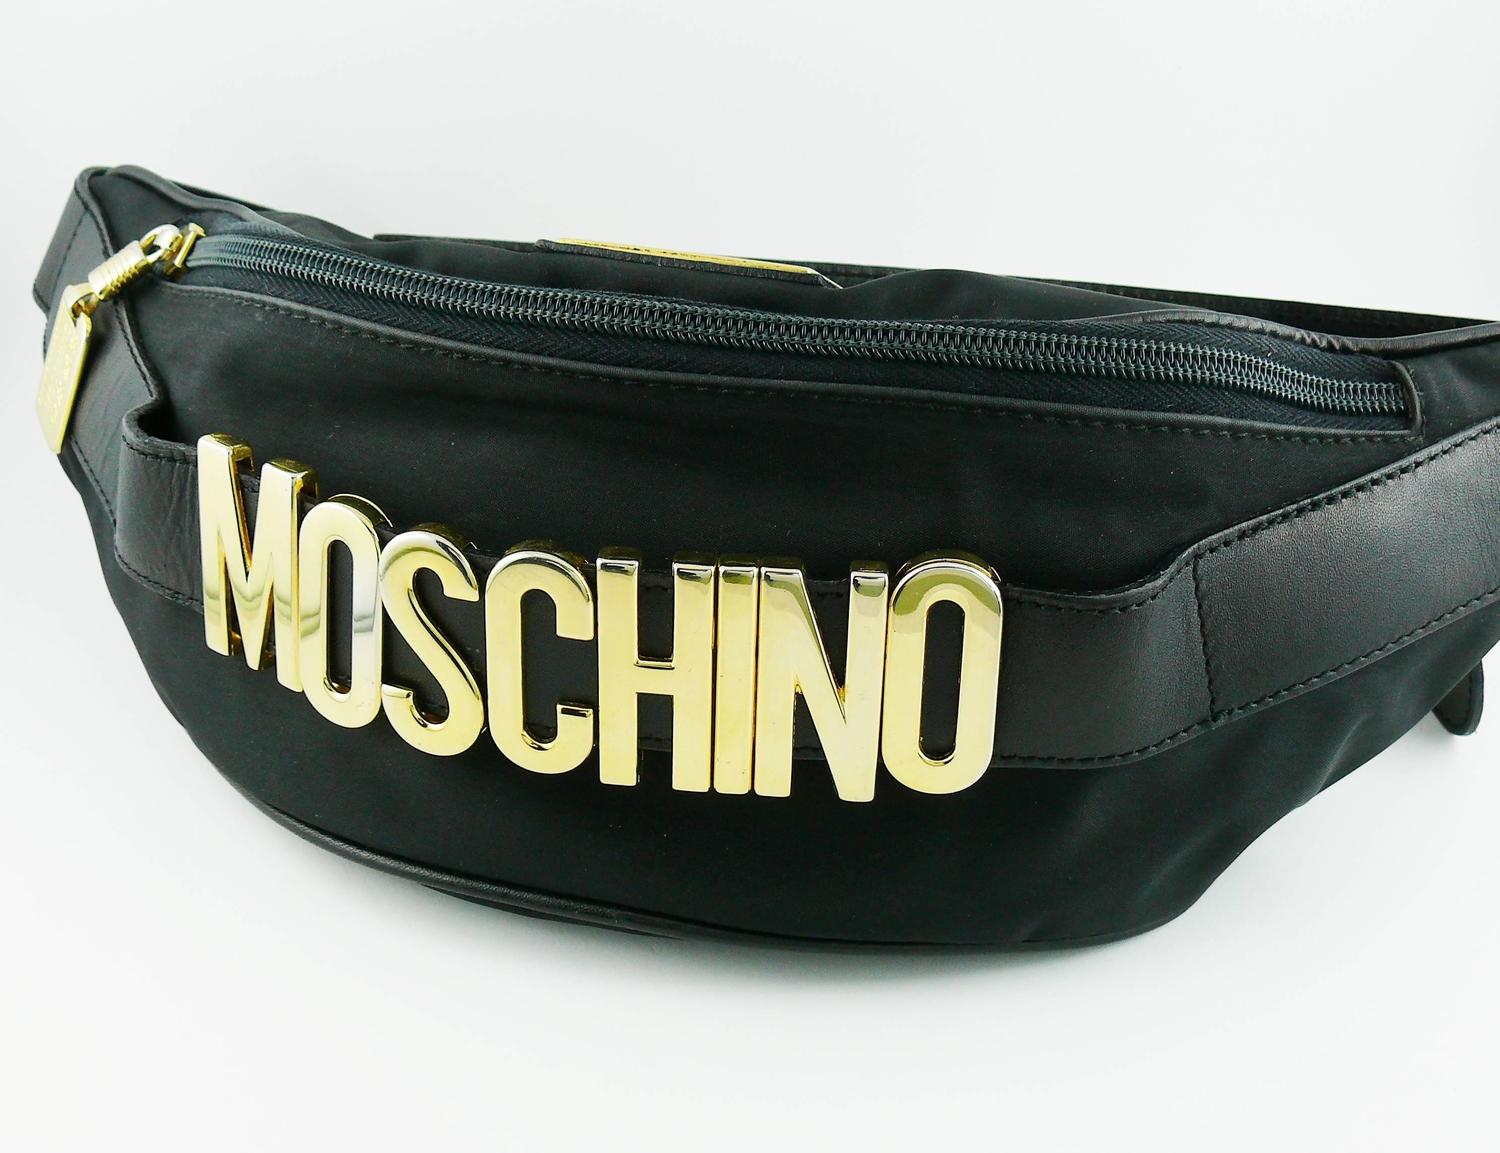 Moschino by Redwall Vintage 1990s Black Fanny Pack For Sale at 1stdibs